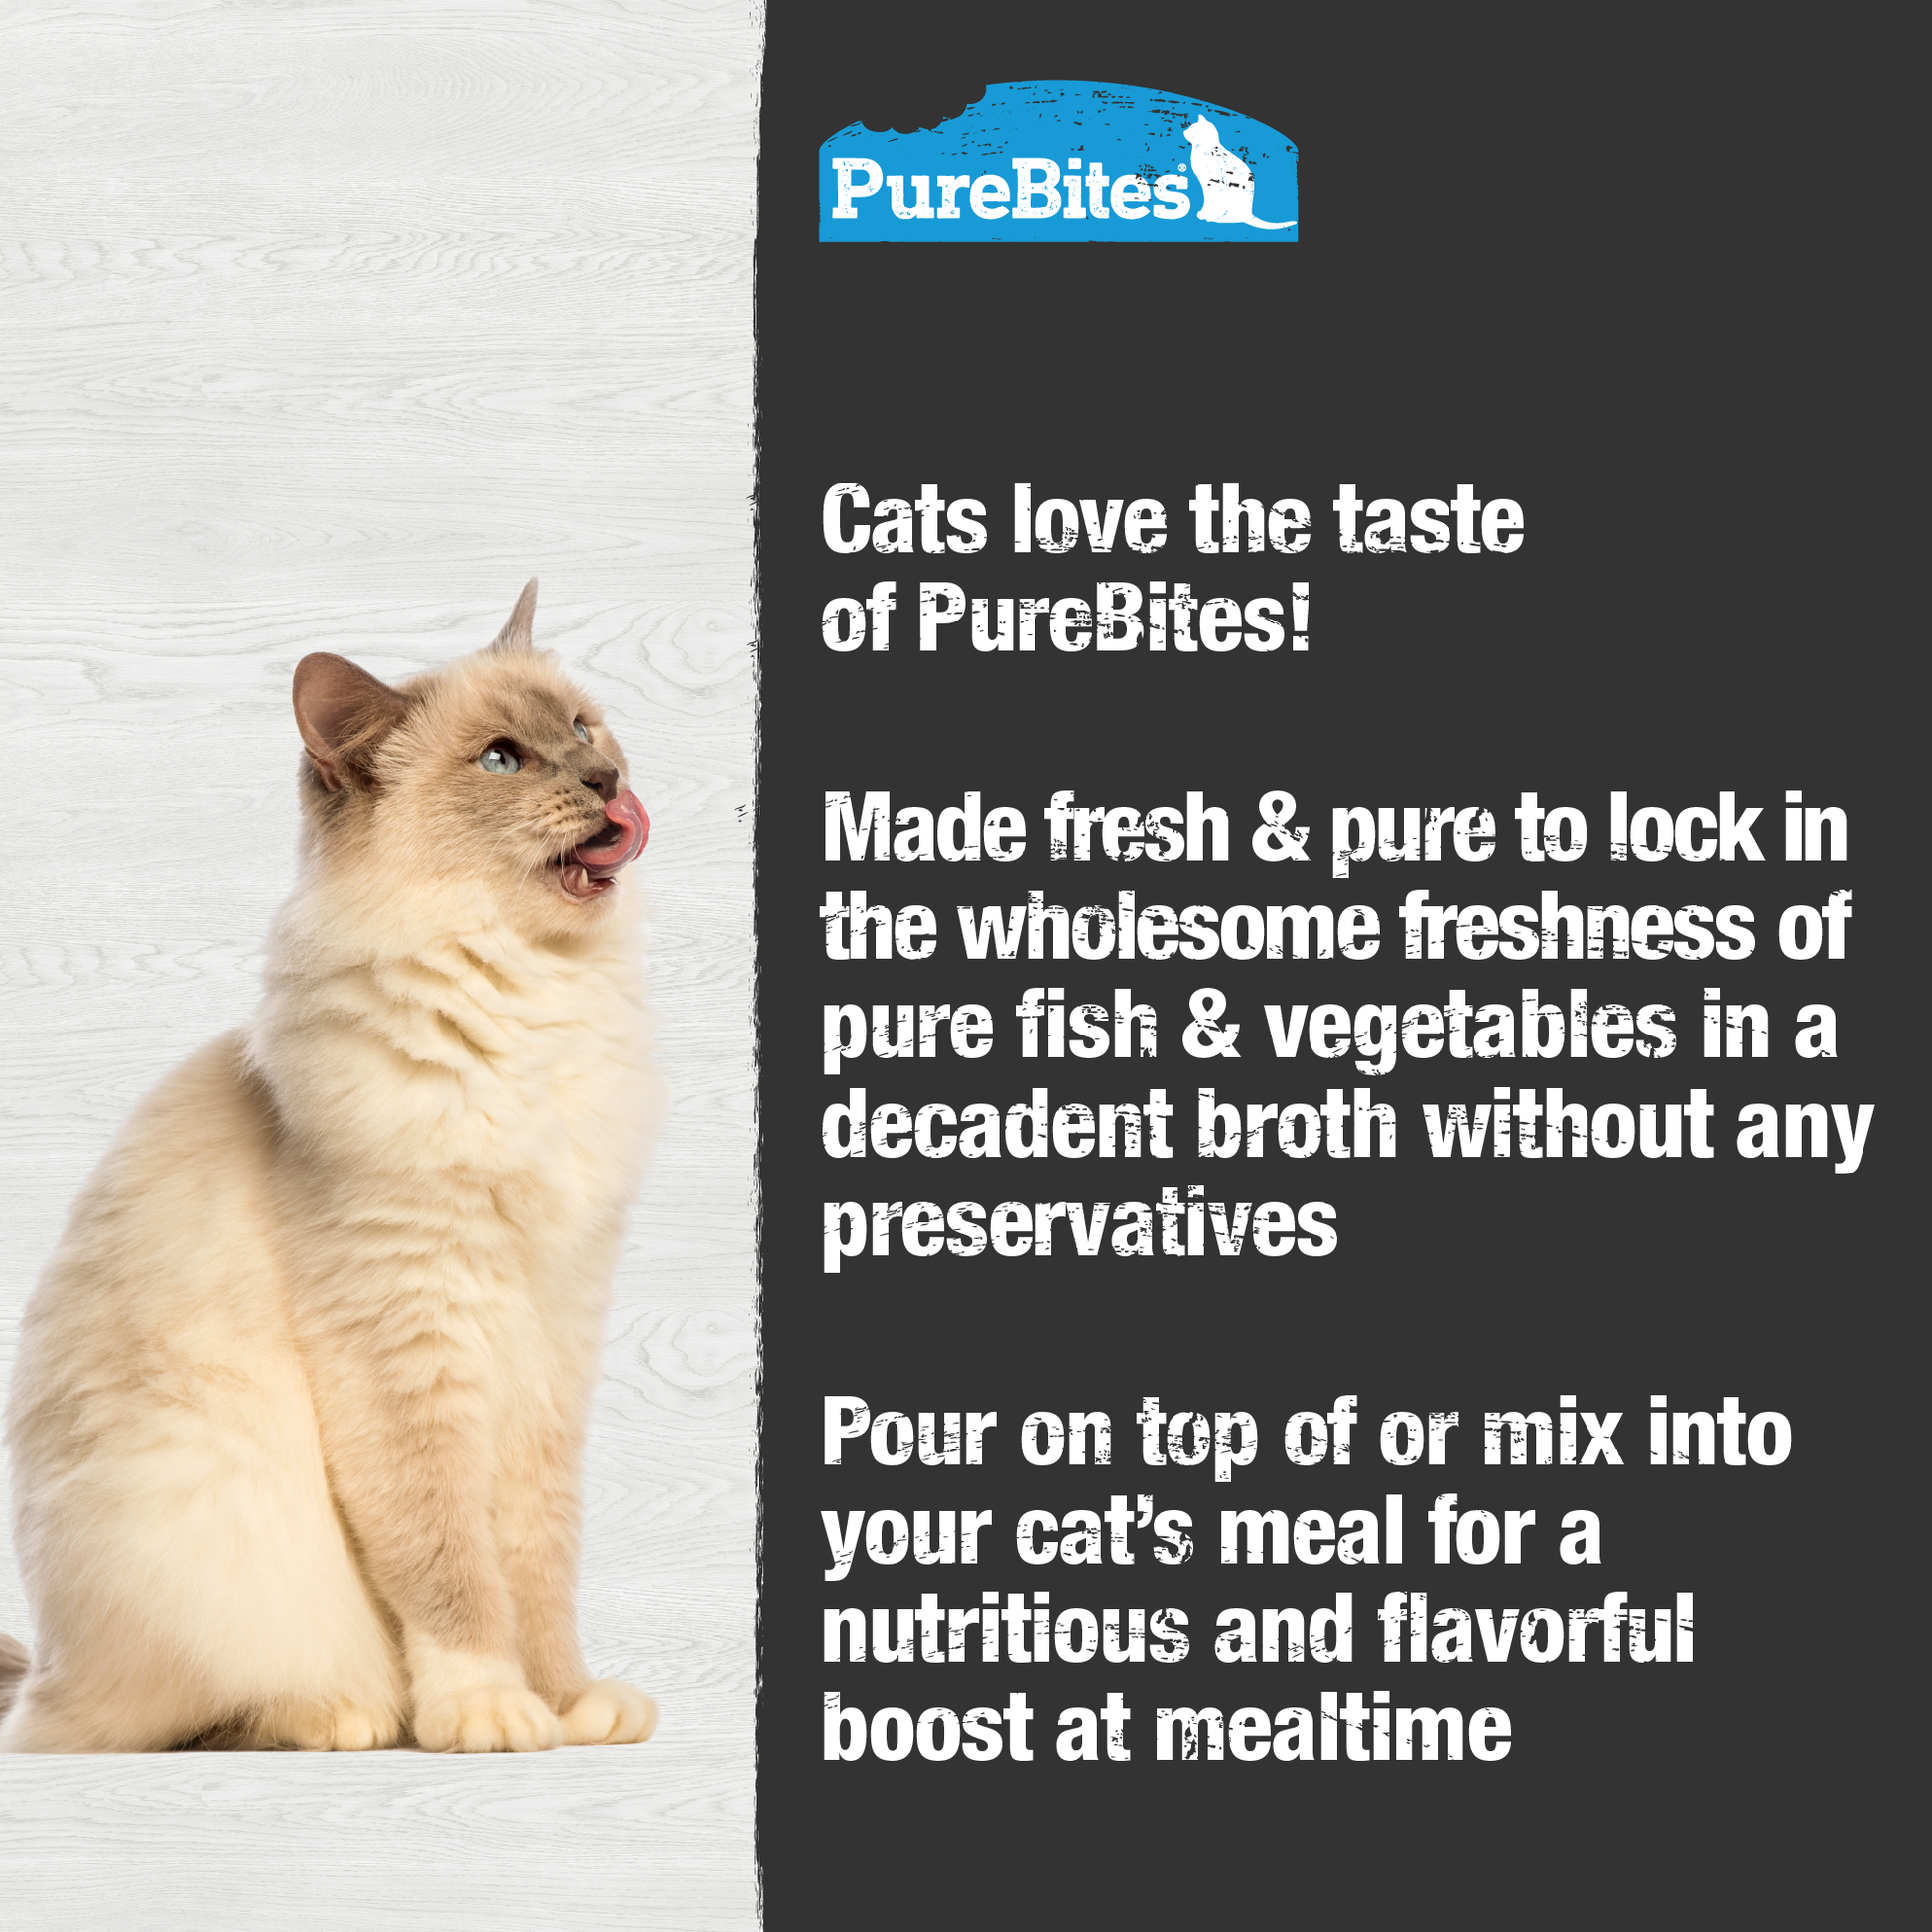 Made fresh & pure means more protein and nutrients packed into every pouch. With only tuna and vegetables in a rich broth, it provides superior nutrition and mirrors a cat's ancestral diet.